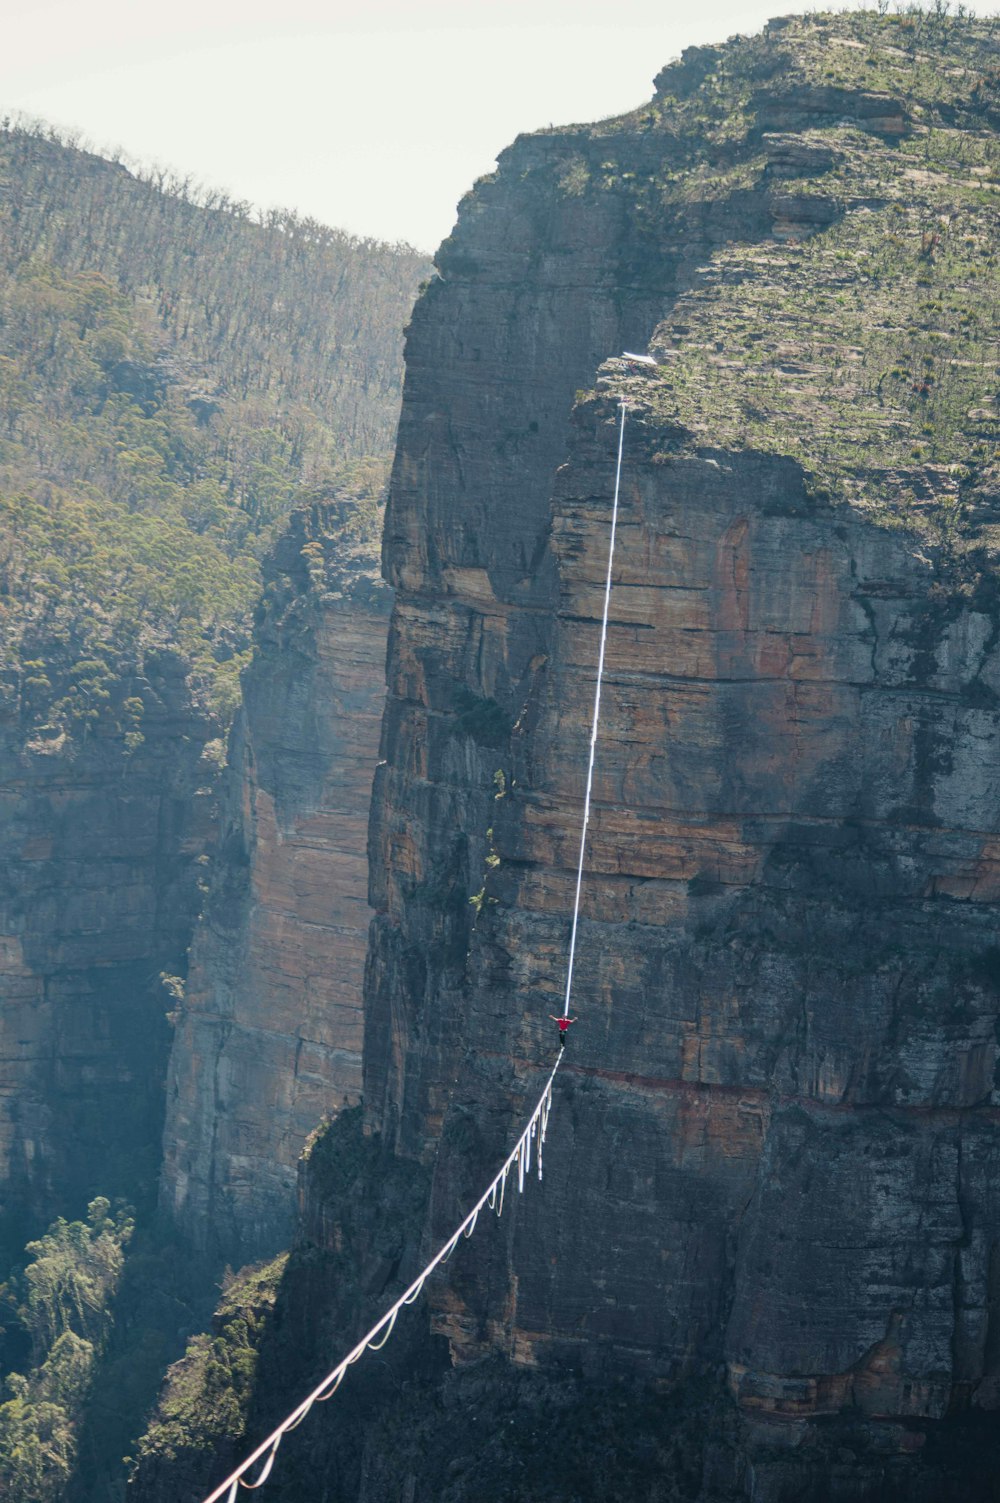 a person on a rope attached to the side of a mountain